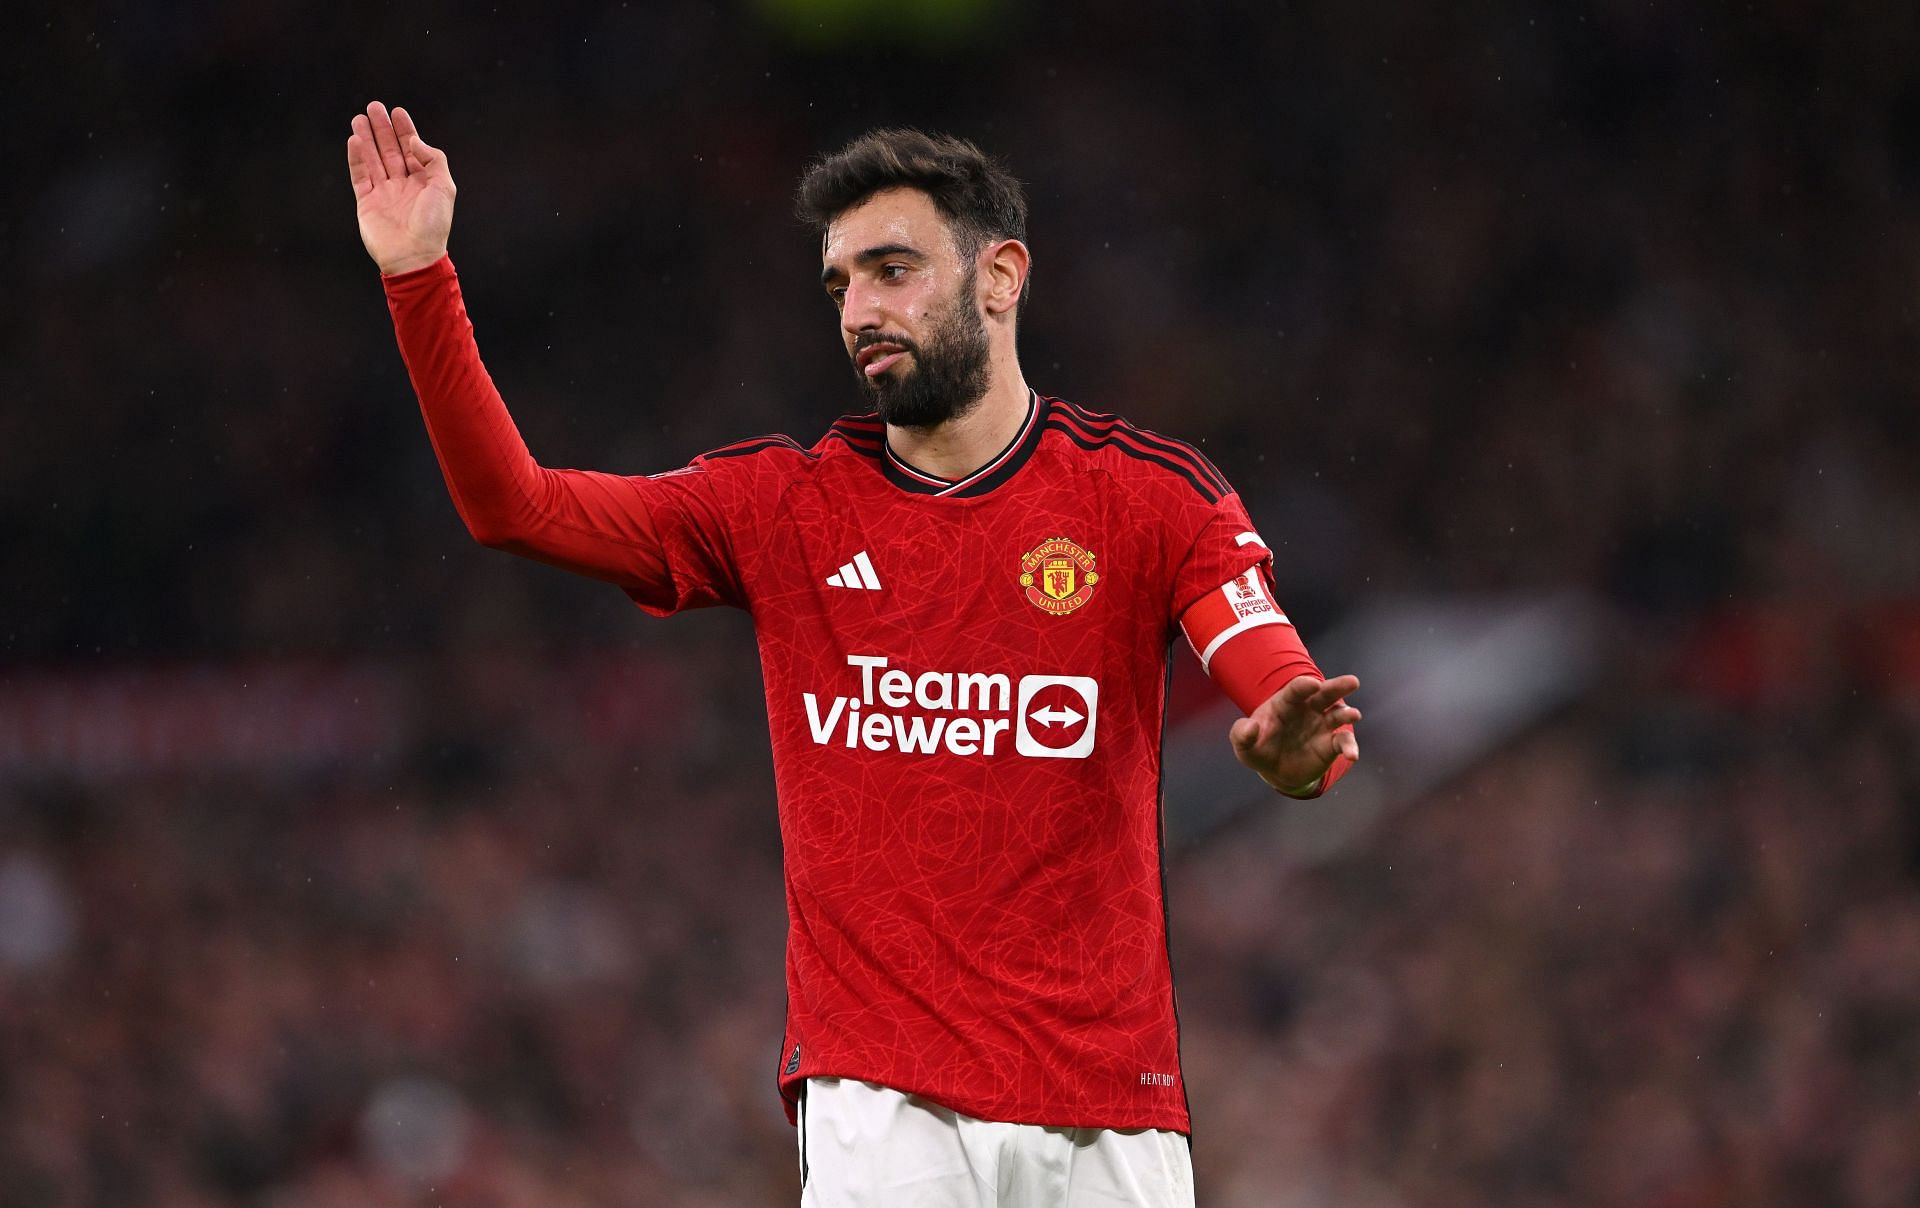 Bruno Fernandes has been indispensable at Old Trafford in recent seasons